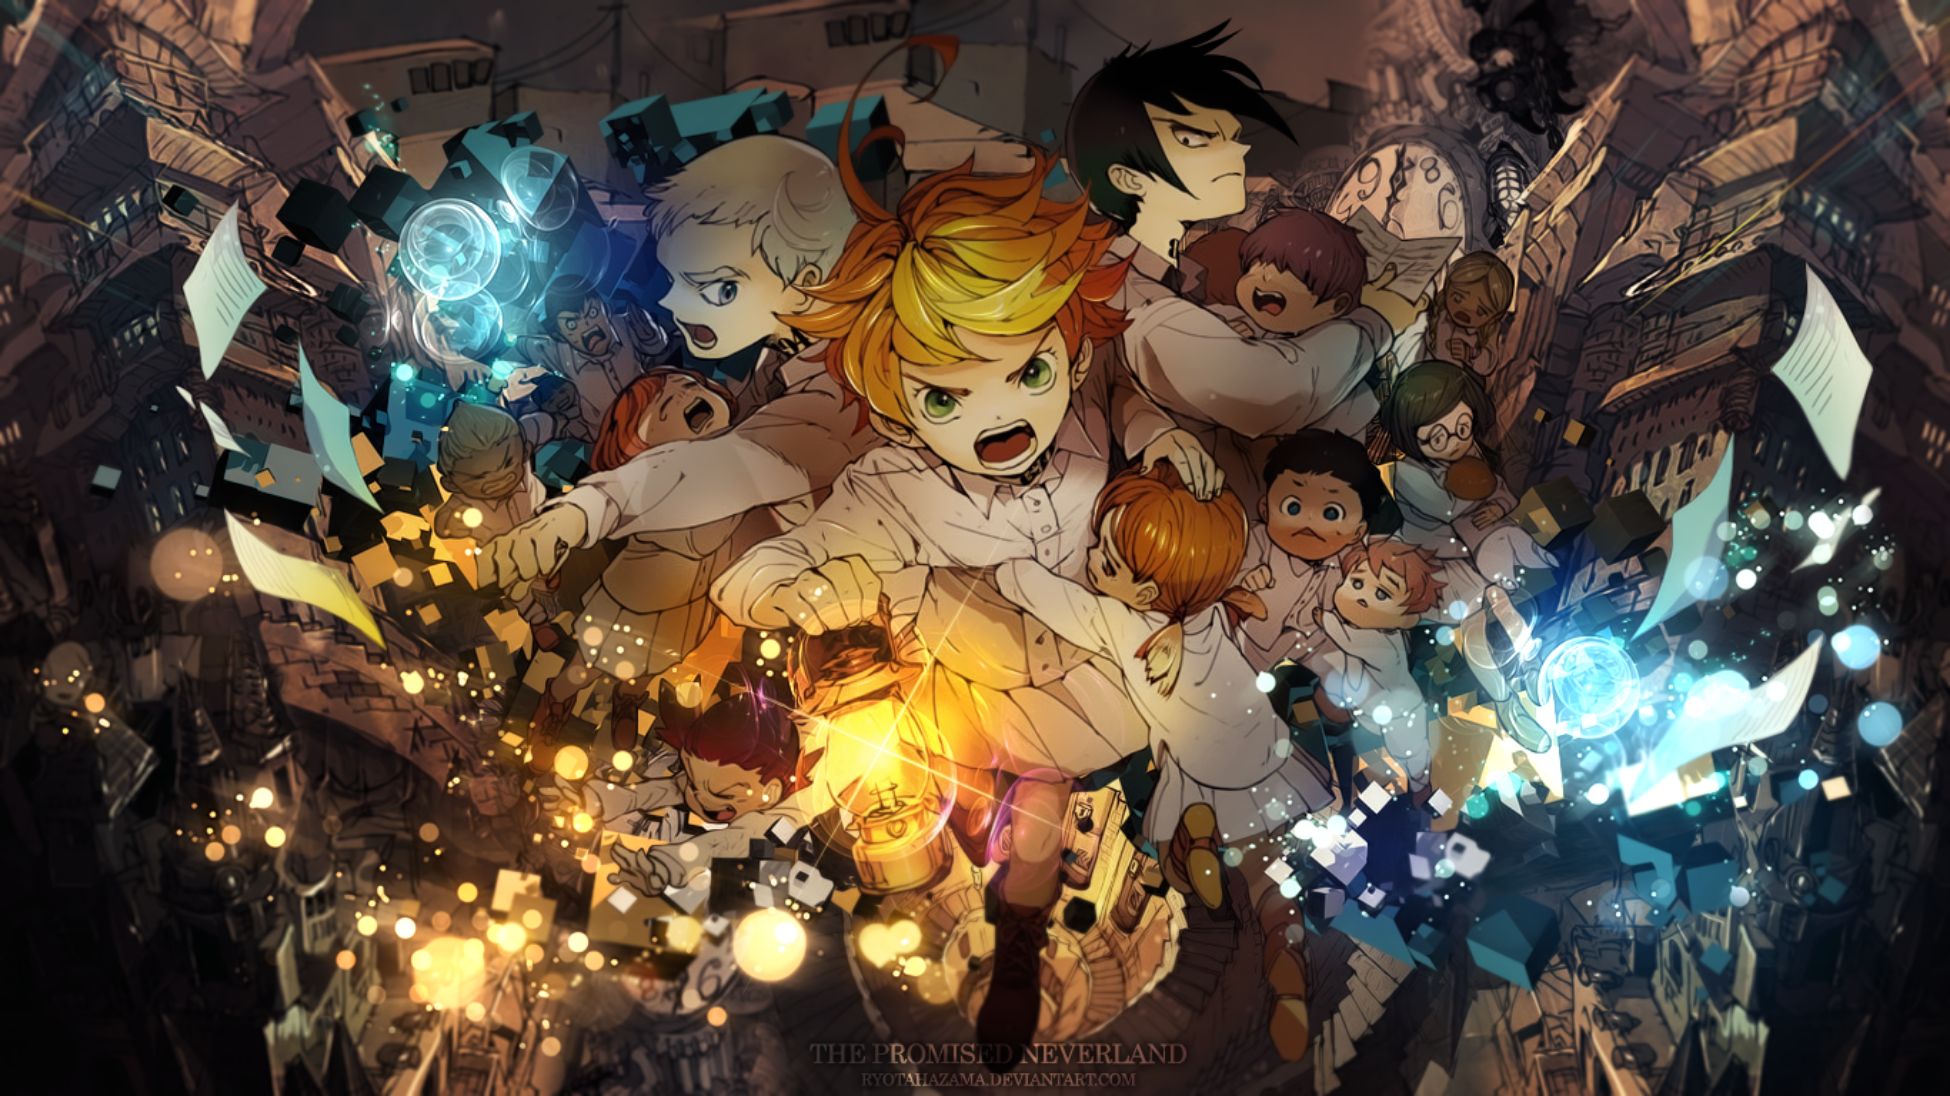 Download Gilda from The Promised Neverland Anime Series Wallpaper